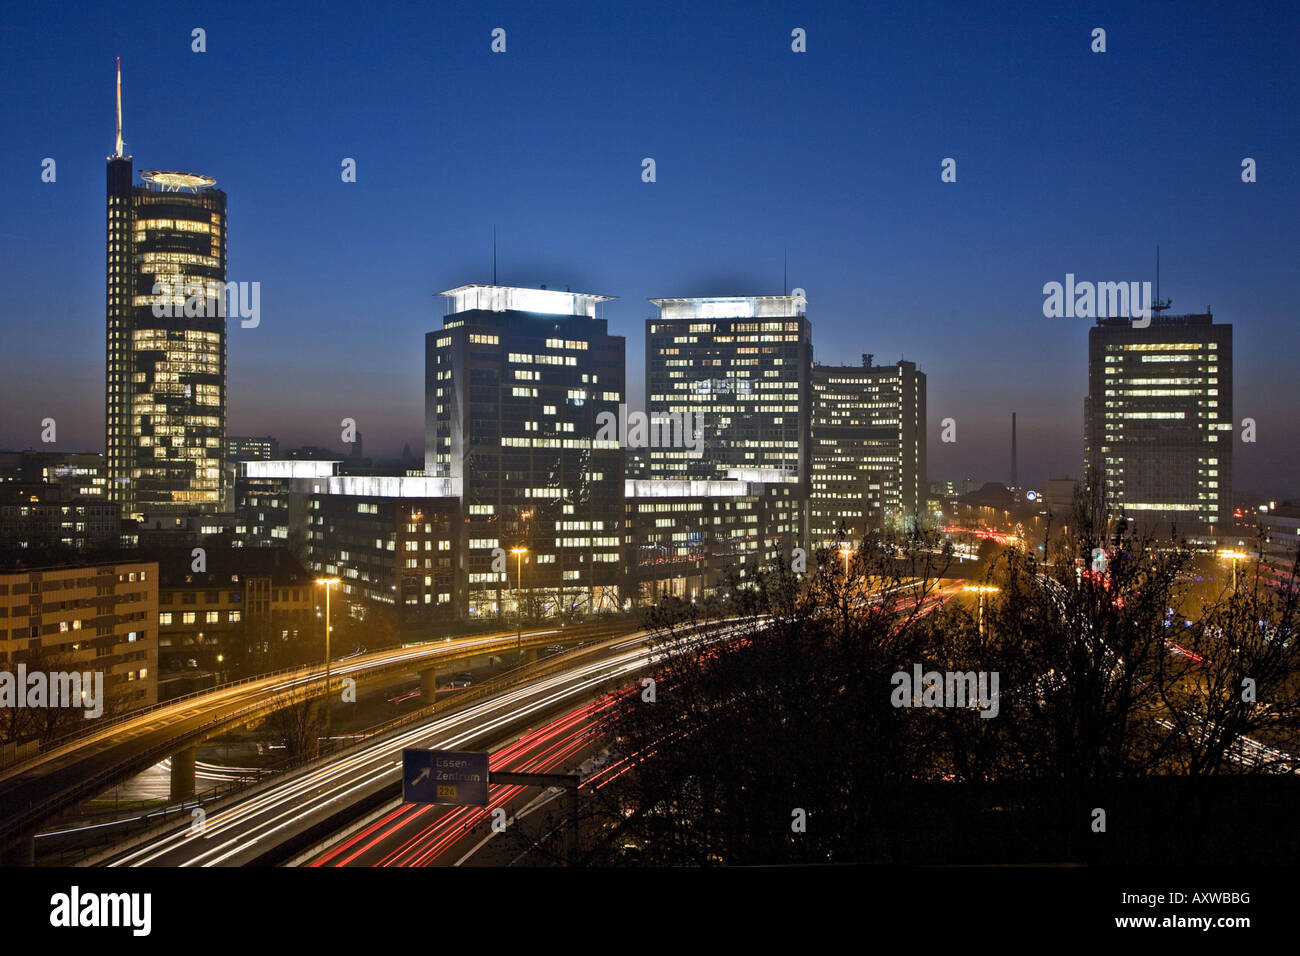 skyline of Essen with highway A 40, RWE Tower and buidings of Evonik and Postbank, Germany, North Rhine-Westphalia, Ruhr Area, Stock Photo